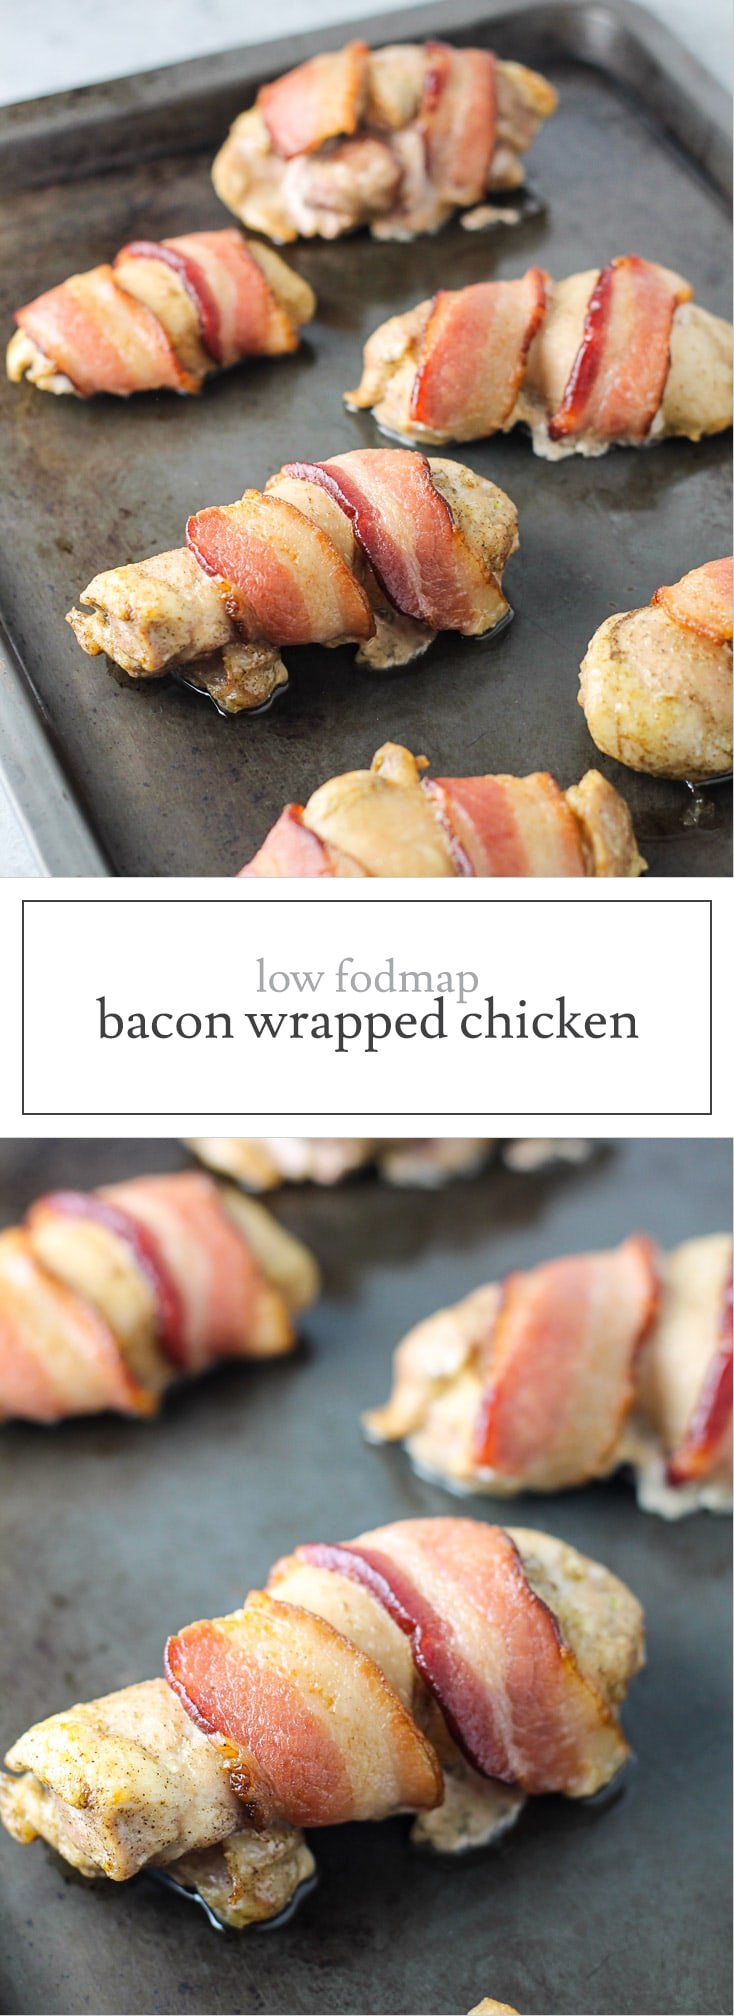 With just four ingredients, this Low Fodmap Bacon Wrapped Chicken is an easy, flavorful entree. Serve with steamed veggies or over a bed of lettuce. Whole30. Paleo. Gluten Free. Dairy Free. 